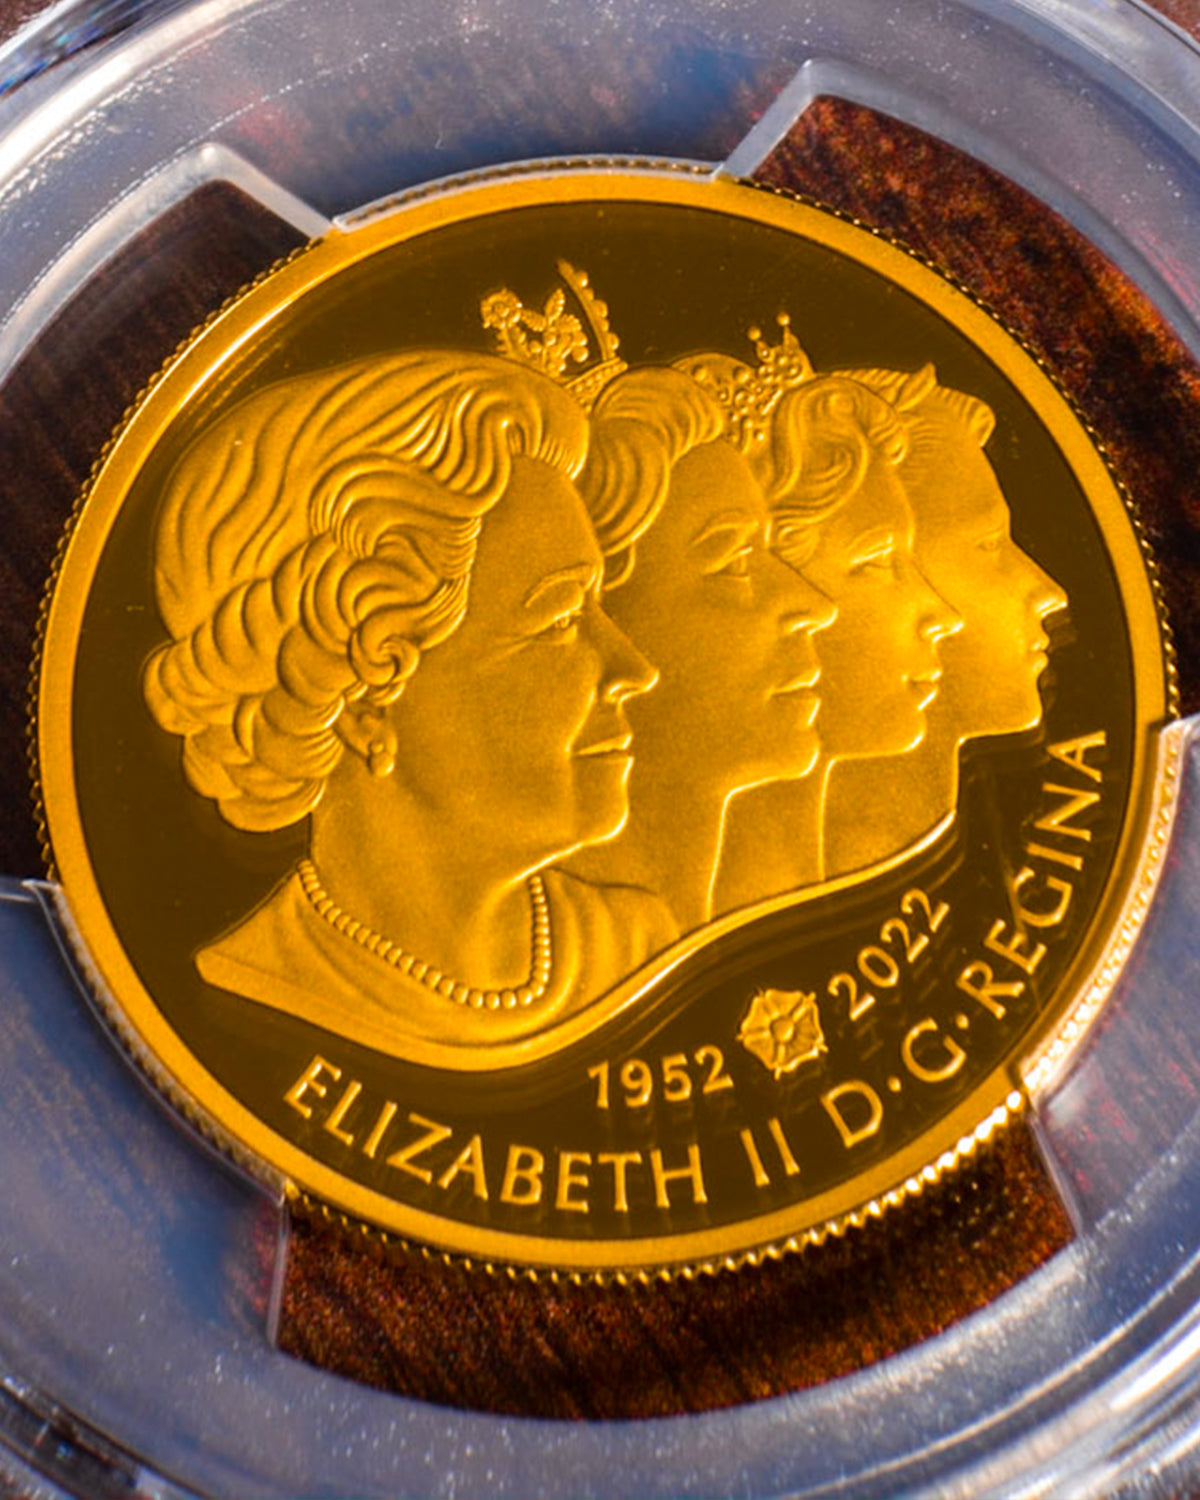 2022 $200 Queens Royal Cypher | First Day of Issue PCGS PR70 Deep Cameo | Susanna Blunt Autographed